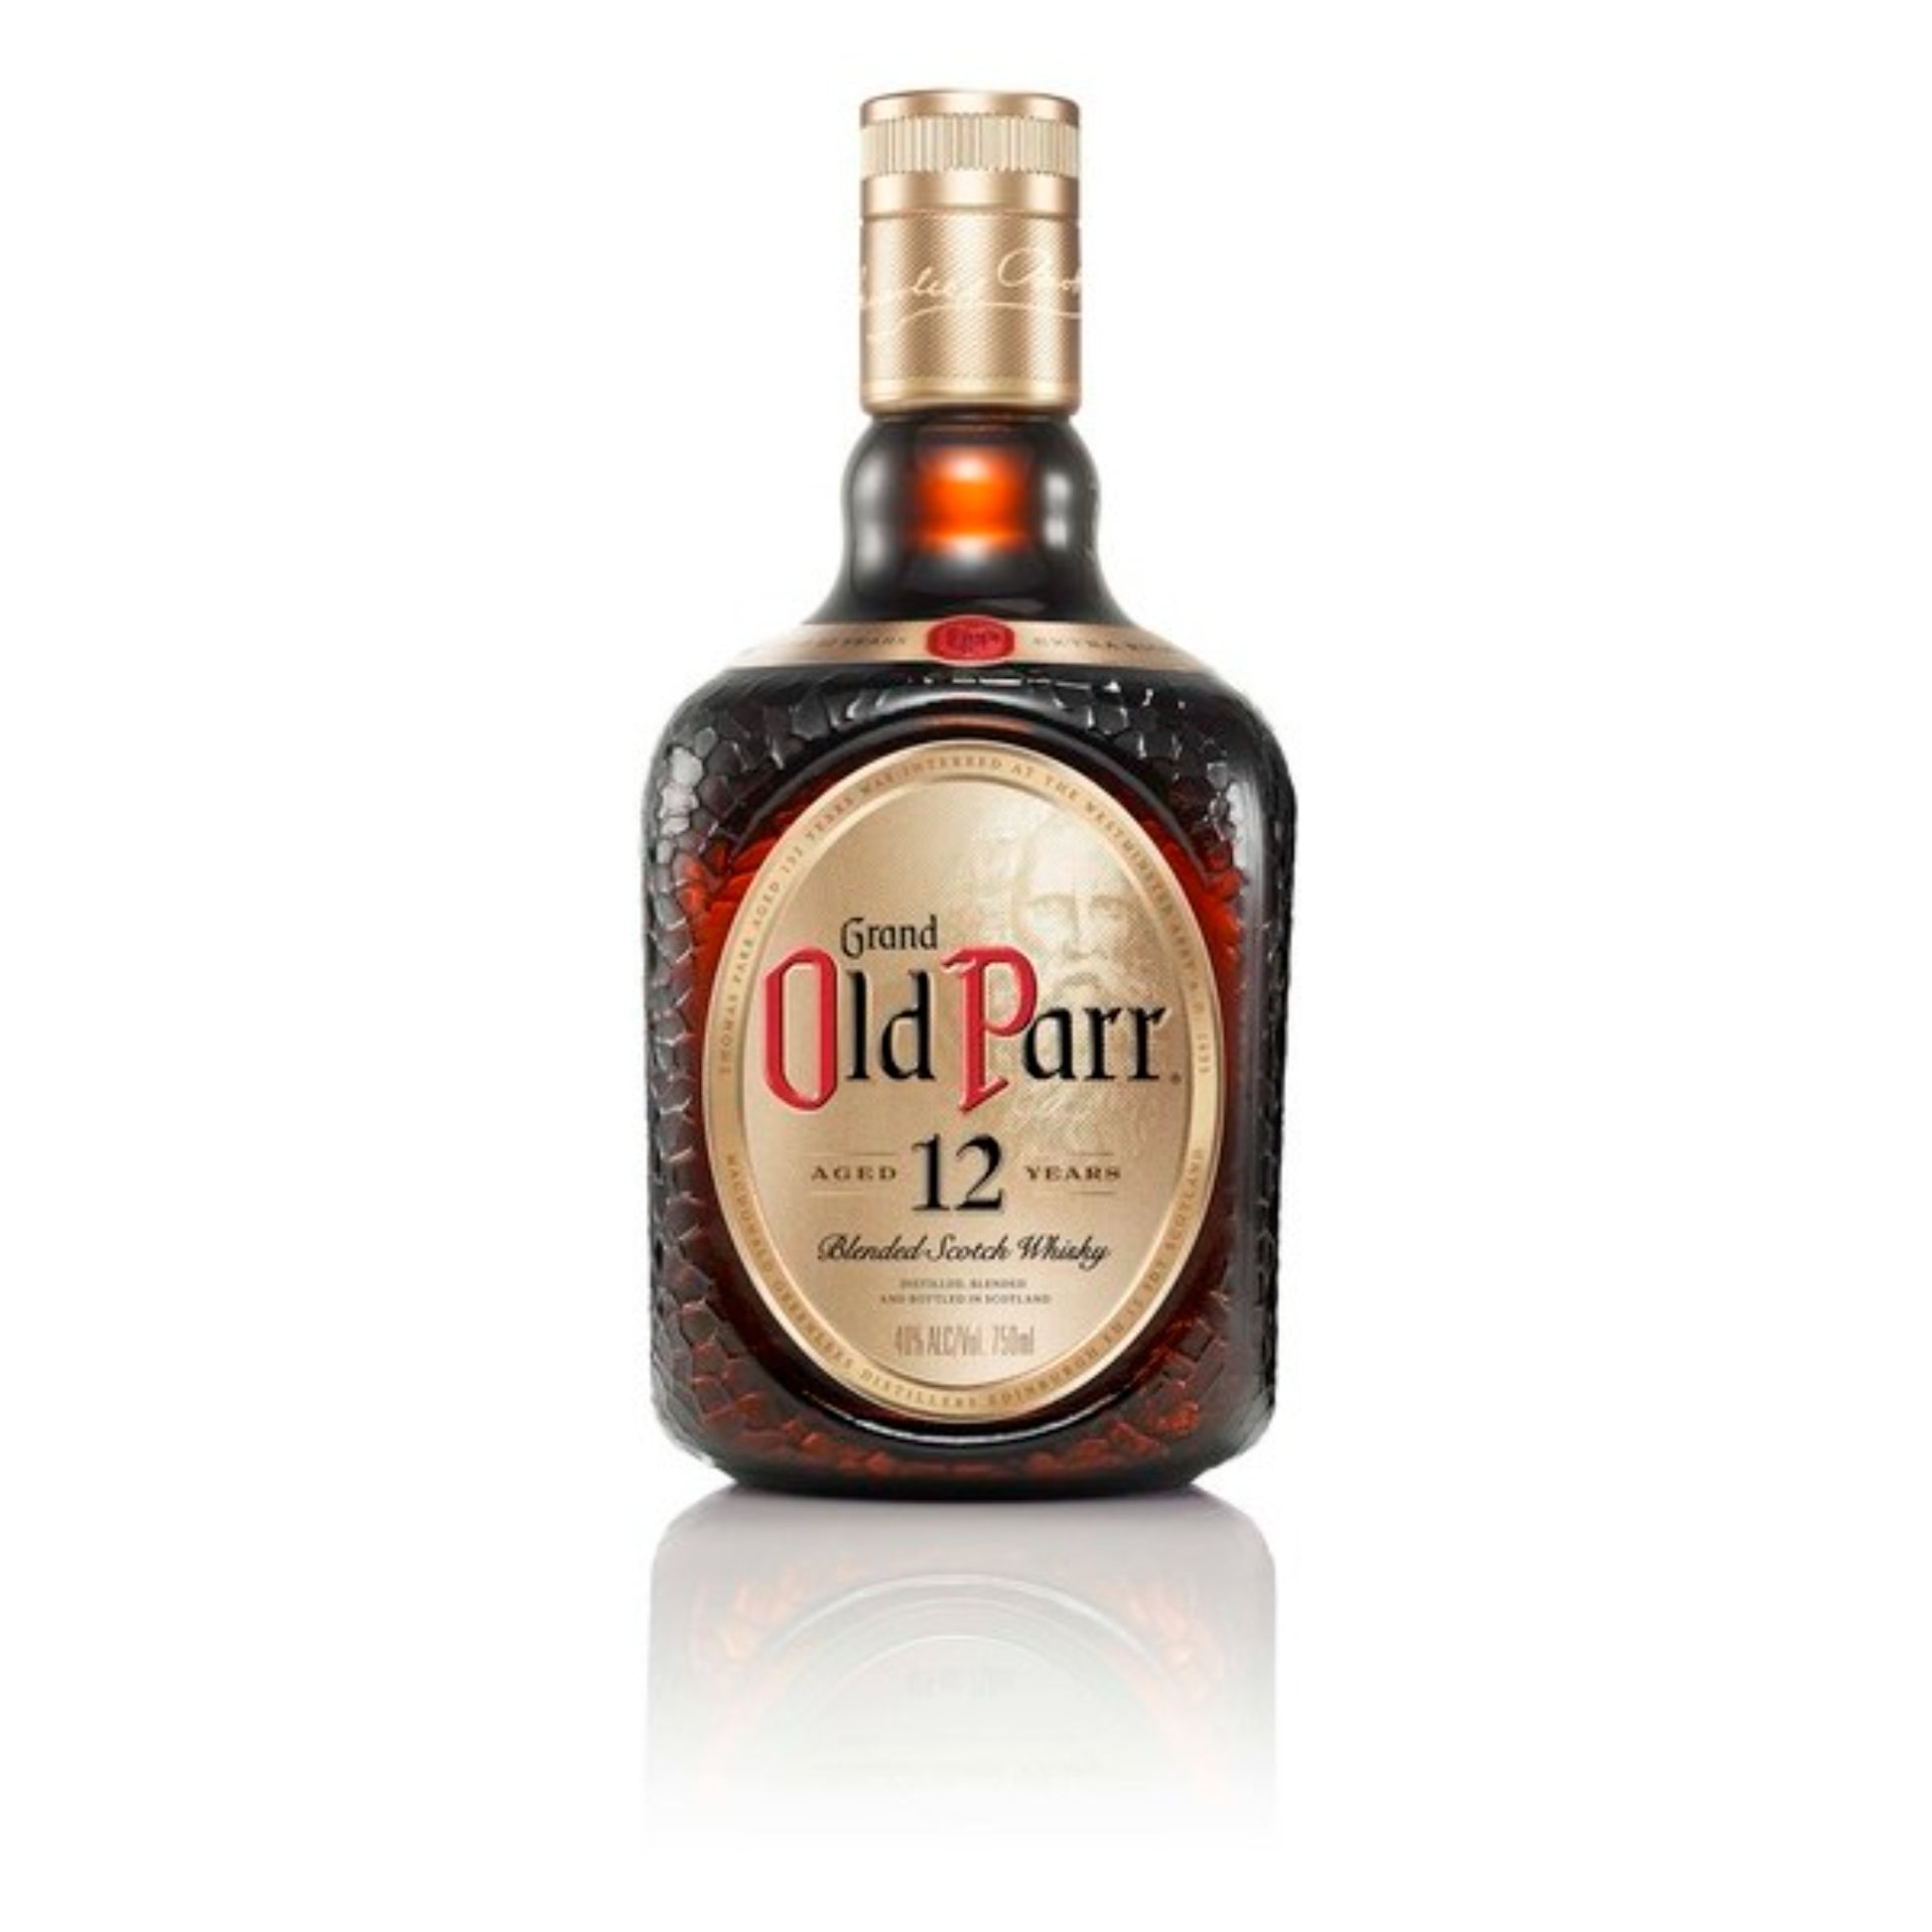 Old Parr 12 Year Old Blended Scotch Whisky - Liquor Geeks